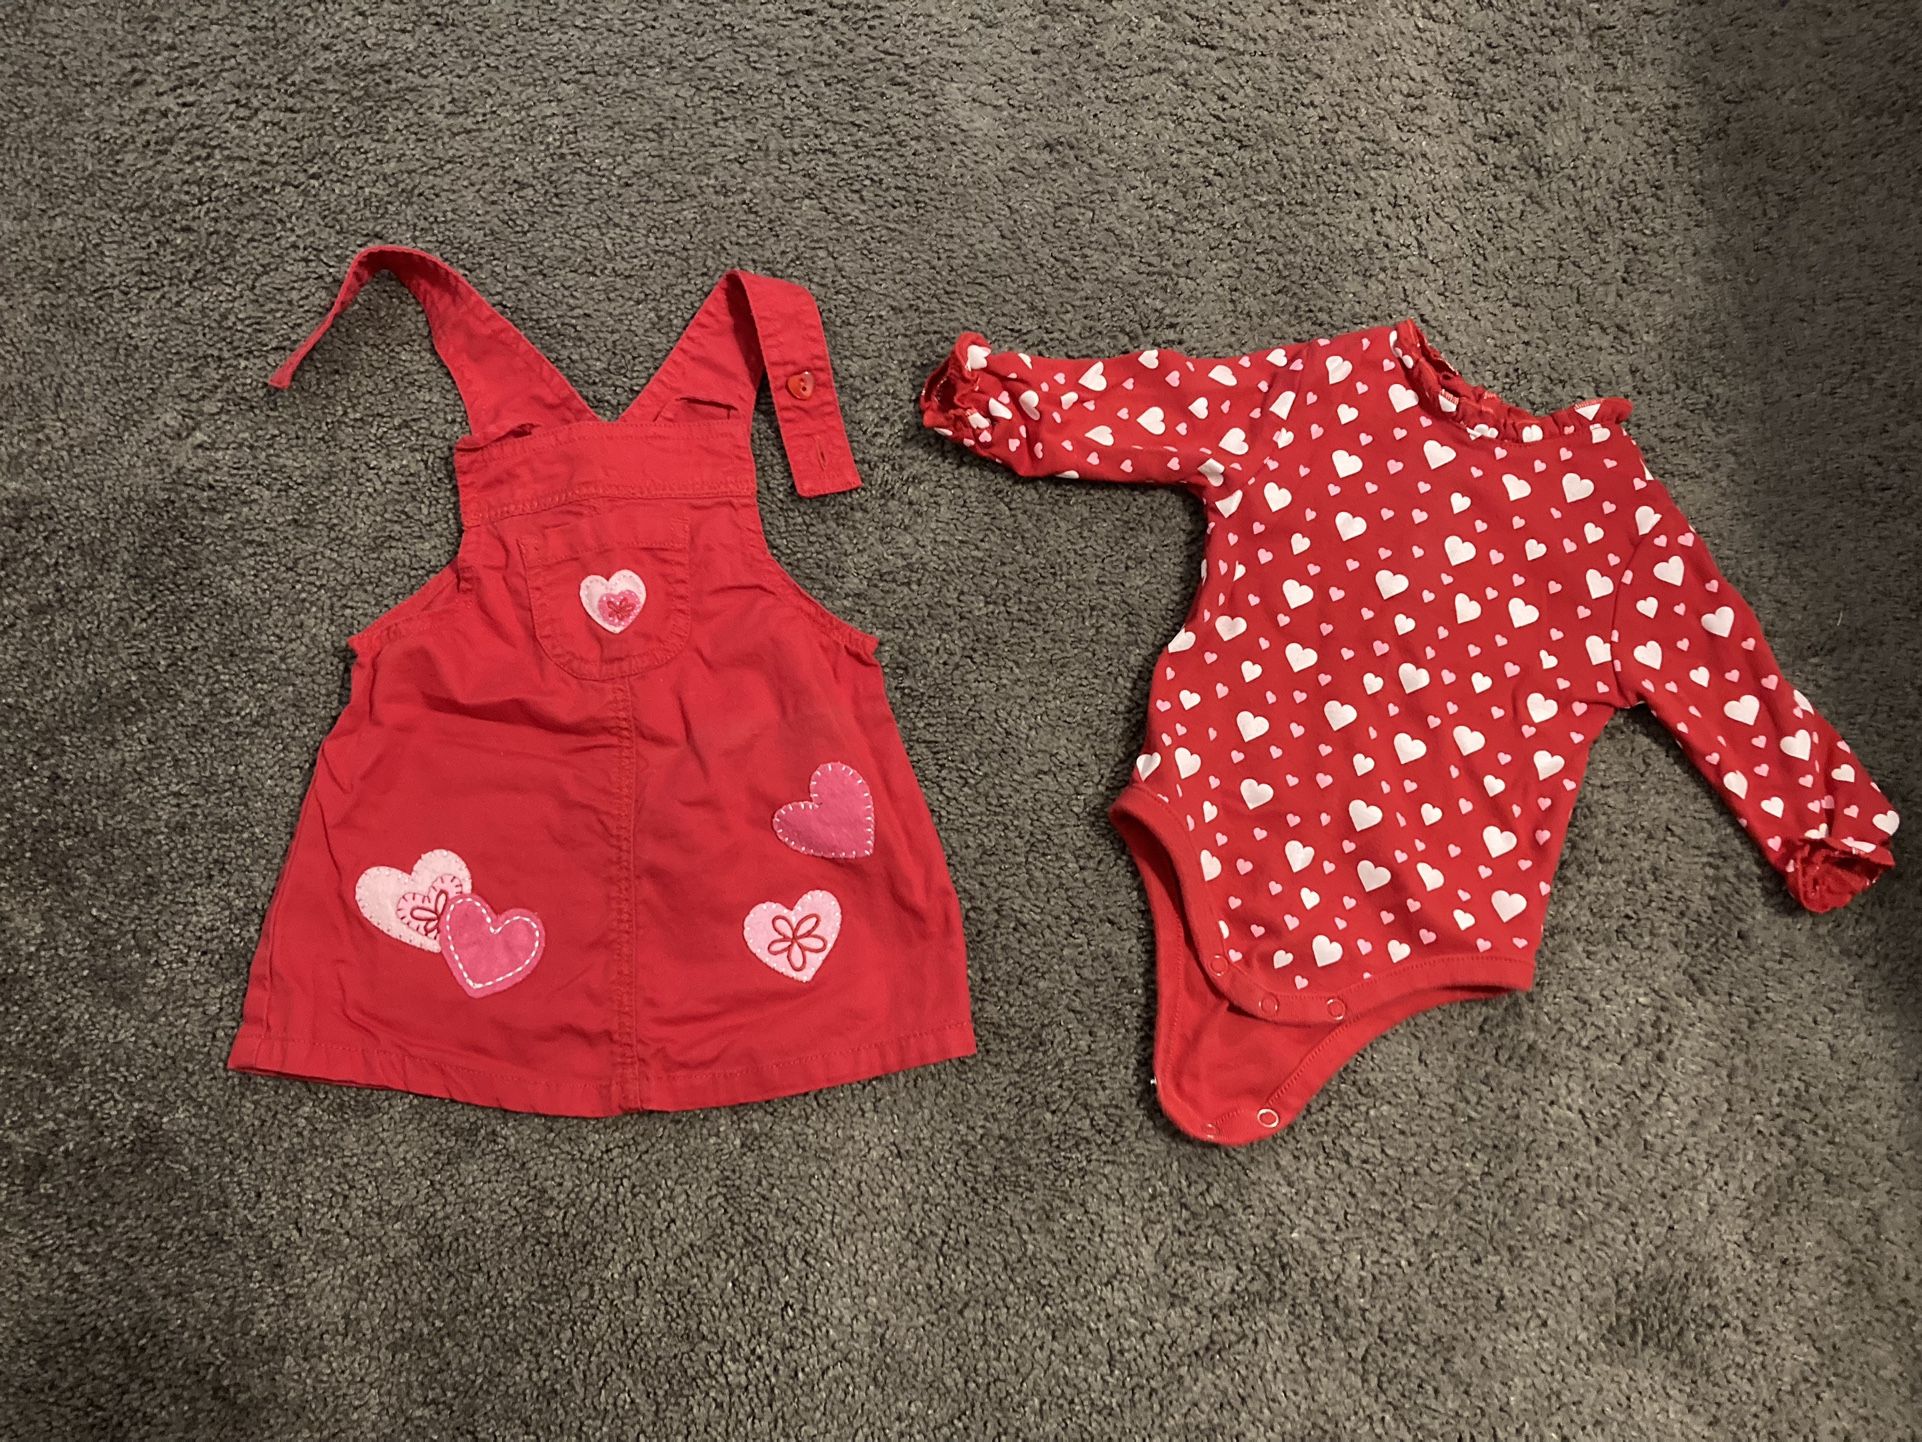 Girls Valentine’s Outfit Size 6/9/12 Months - Like New